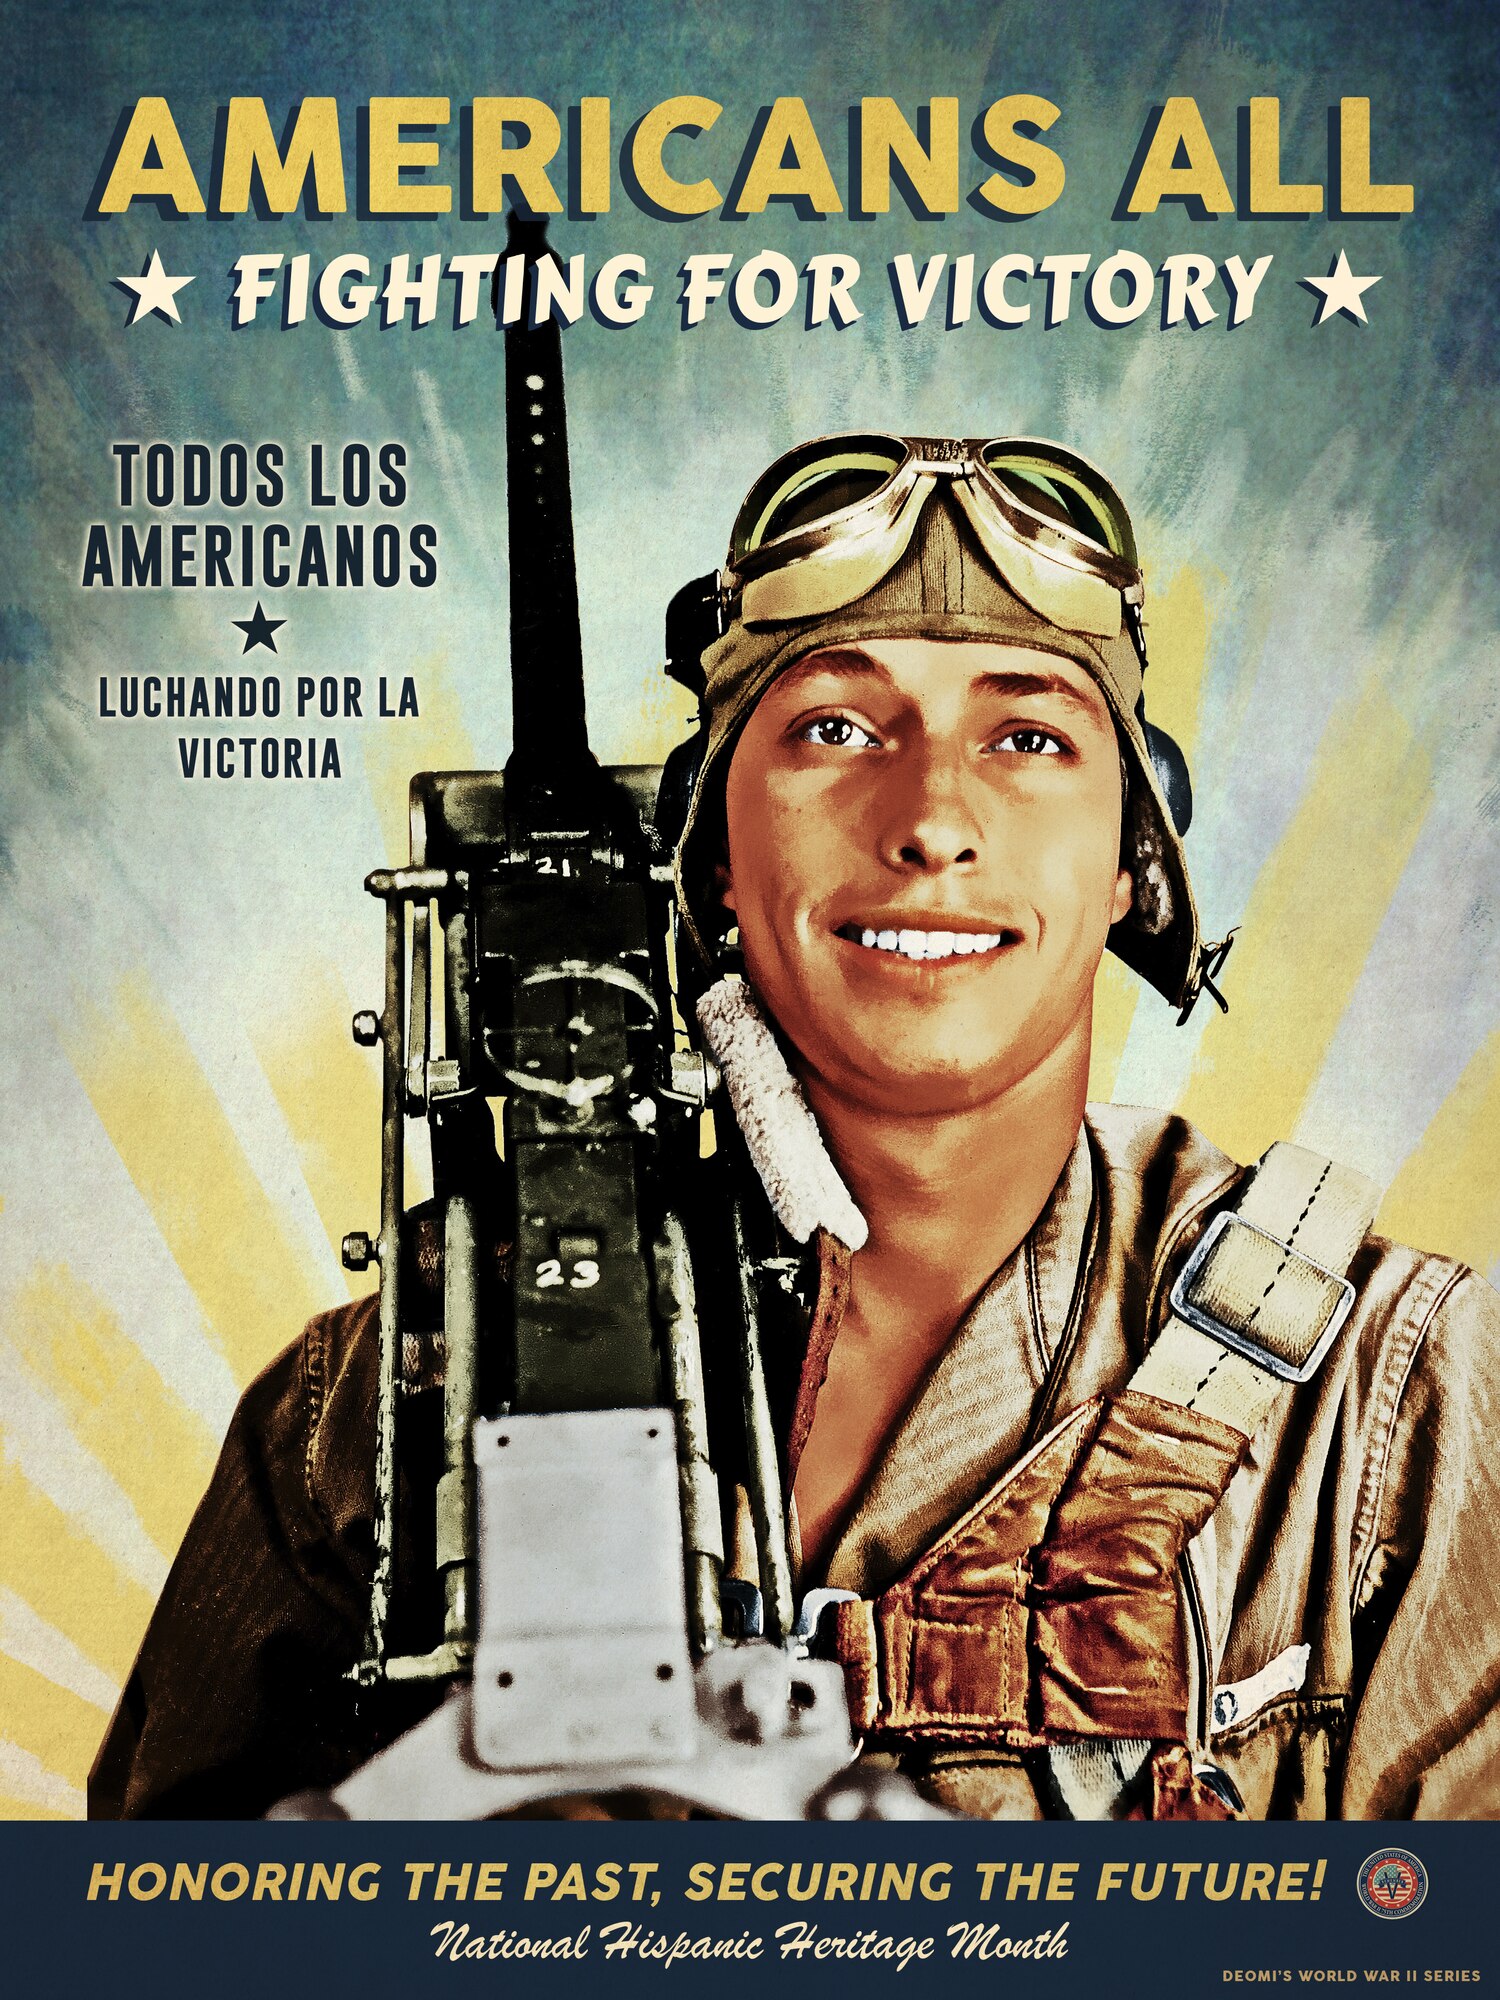 The poster depicts Staff Sgt. Ladislao “L.C.” Castro, the assistant engineer and waist door .50 caliber gunner on a B-24 Liberator bomber named “T-Bar” of the "Flying Eightballs" in the 506th Squadron, 44th Bombardment Group (Heavy), 8th Air Force. We celebrate him in correlation with National Hispanic Heritage Month, formerly known as Hispanic Heritage Week, has been celebrated for more than 50 years and dates back to 1968. In 1988, during the President Ronald Reagan administration the observance period, that was once only a week extended to a month and received its new name. Since then, National Hispanic Heritage Month begins every 15th of September and ends the 15th of October. During this month members pay respect to the Americans who sacrificed themselves for this nation.